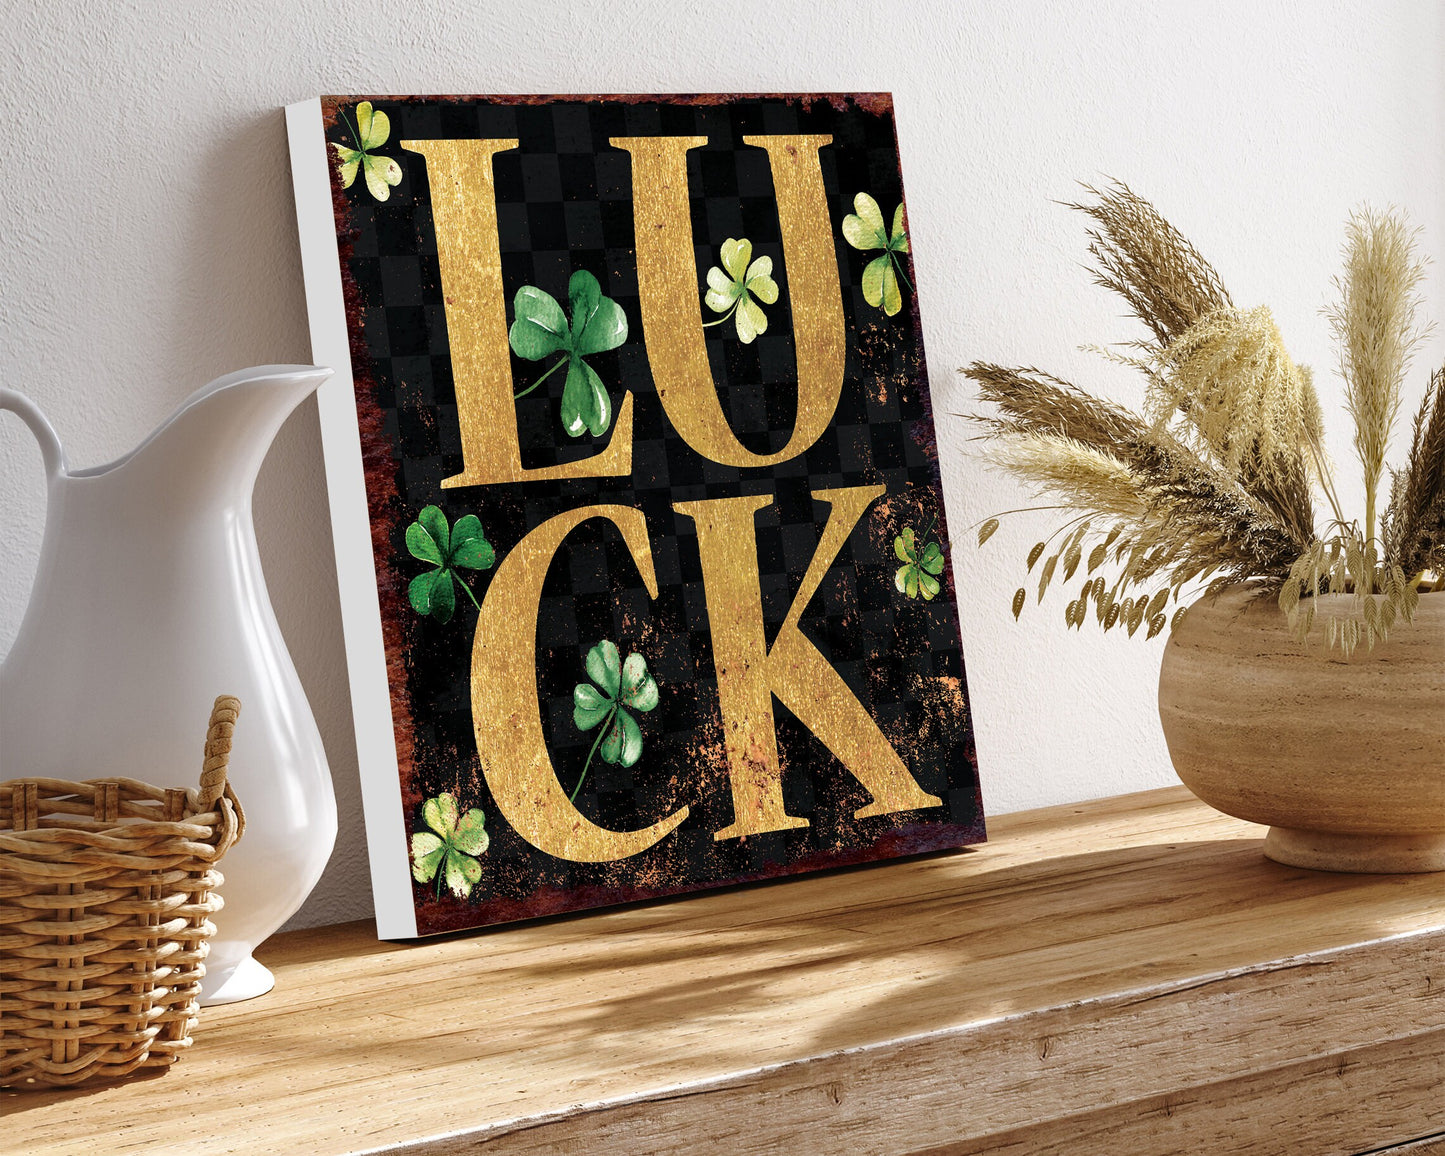 12in St. Patrick's Day Luck Clover Canvas Sign, Vintage Decor, Modern Farmhouse Mantel Entryway Decor, St.Patrick's Day Wall Decor